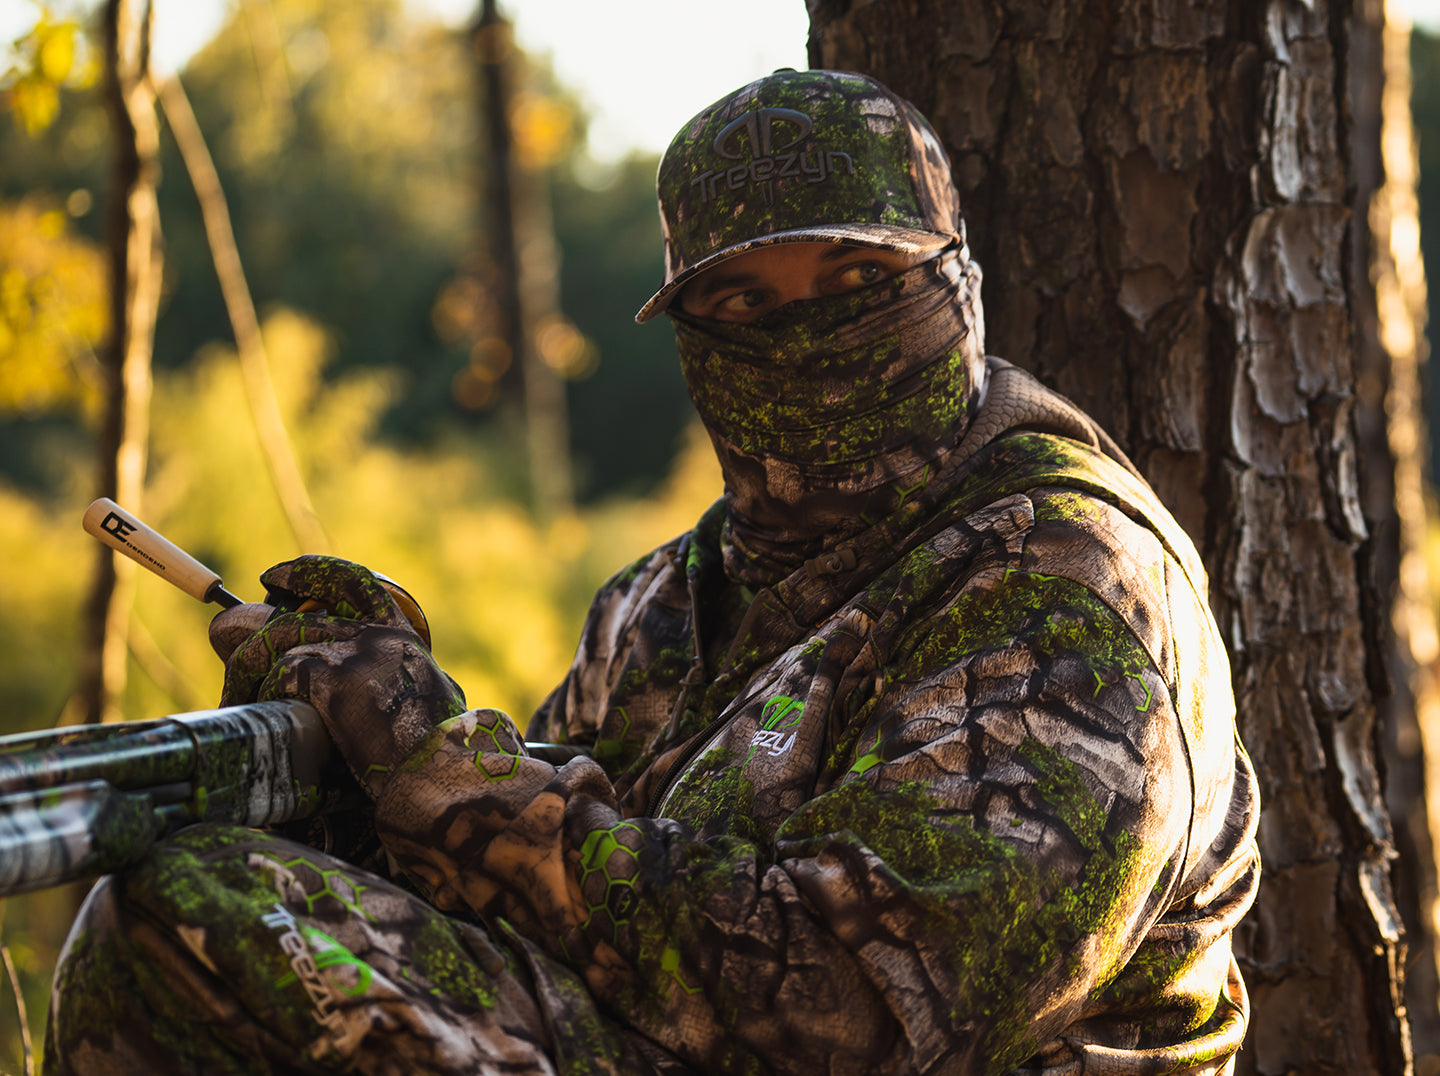 Hunting Gear--Top Quality Camo for the Woods – The Mossy Oak Store